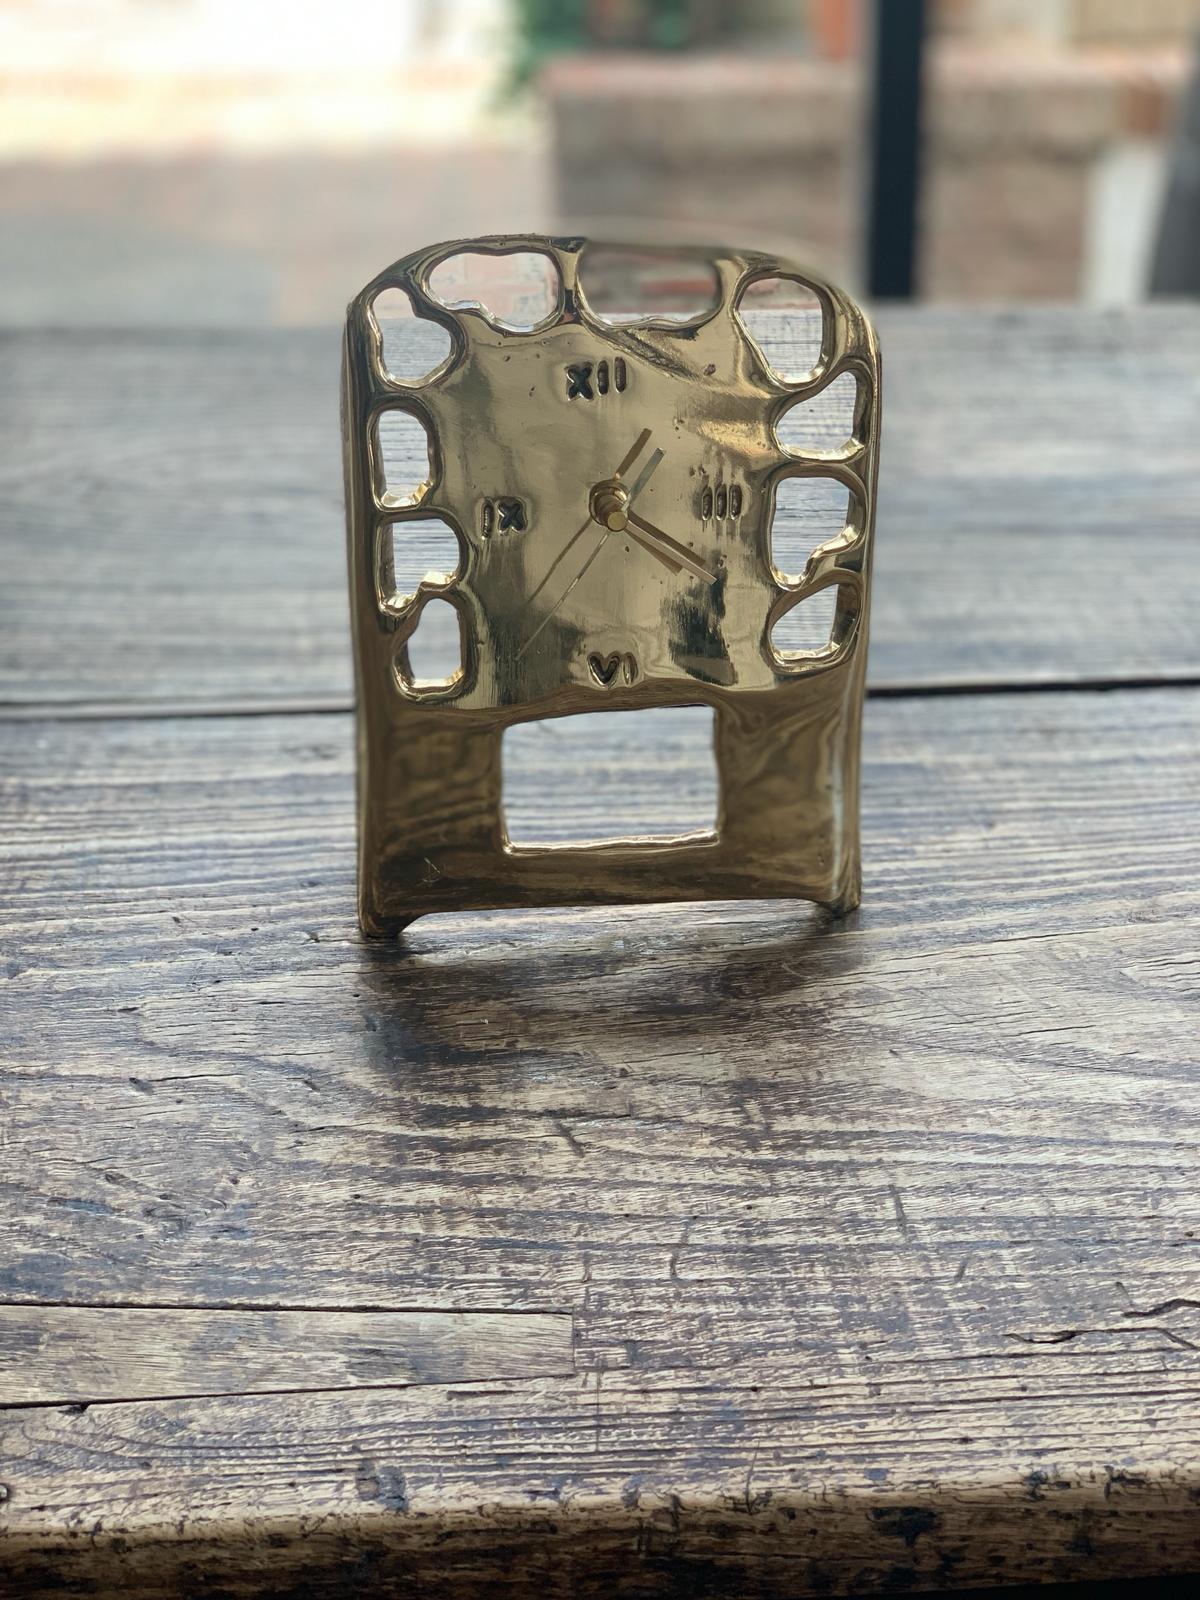 The decorative Clock was created by David Marshall, it is made of  sand cast brass. 
Handmade, mounted and finished in our foundry and workshop in Spain from recycled materials.
Certified authentic by the Artist David Marshall with his